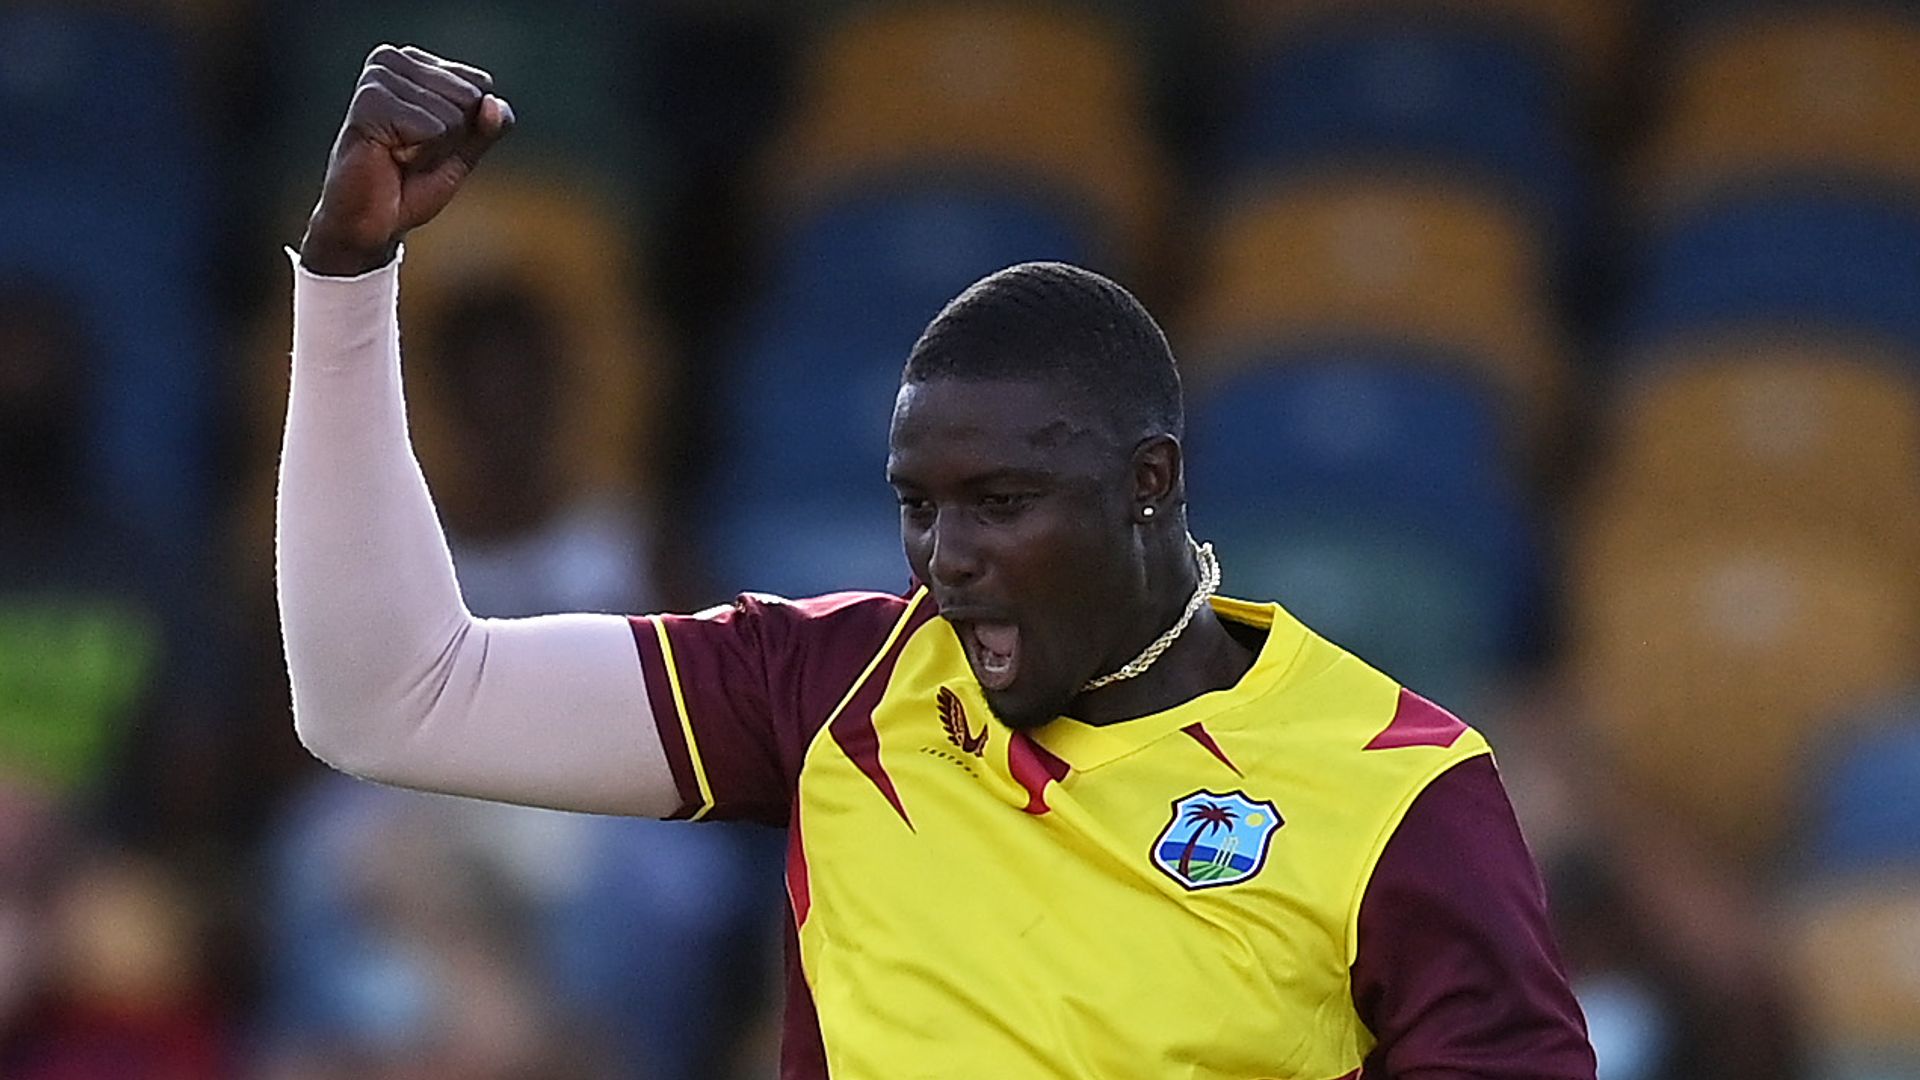 England skittled for 103 as West Indies go 1-0 up